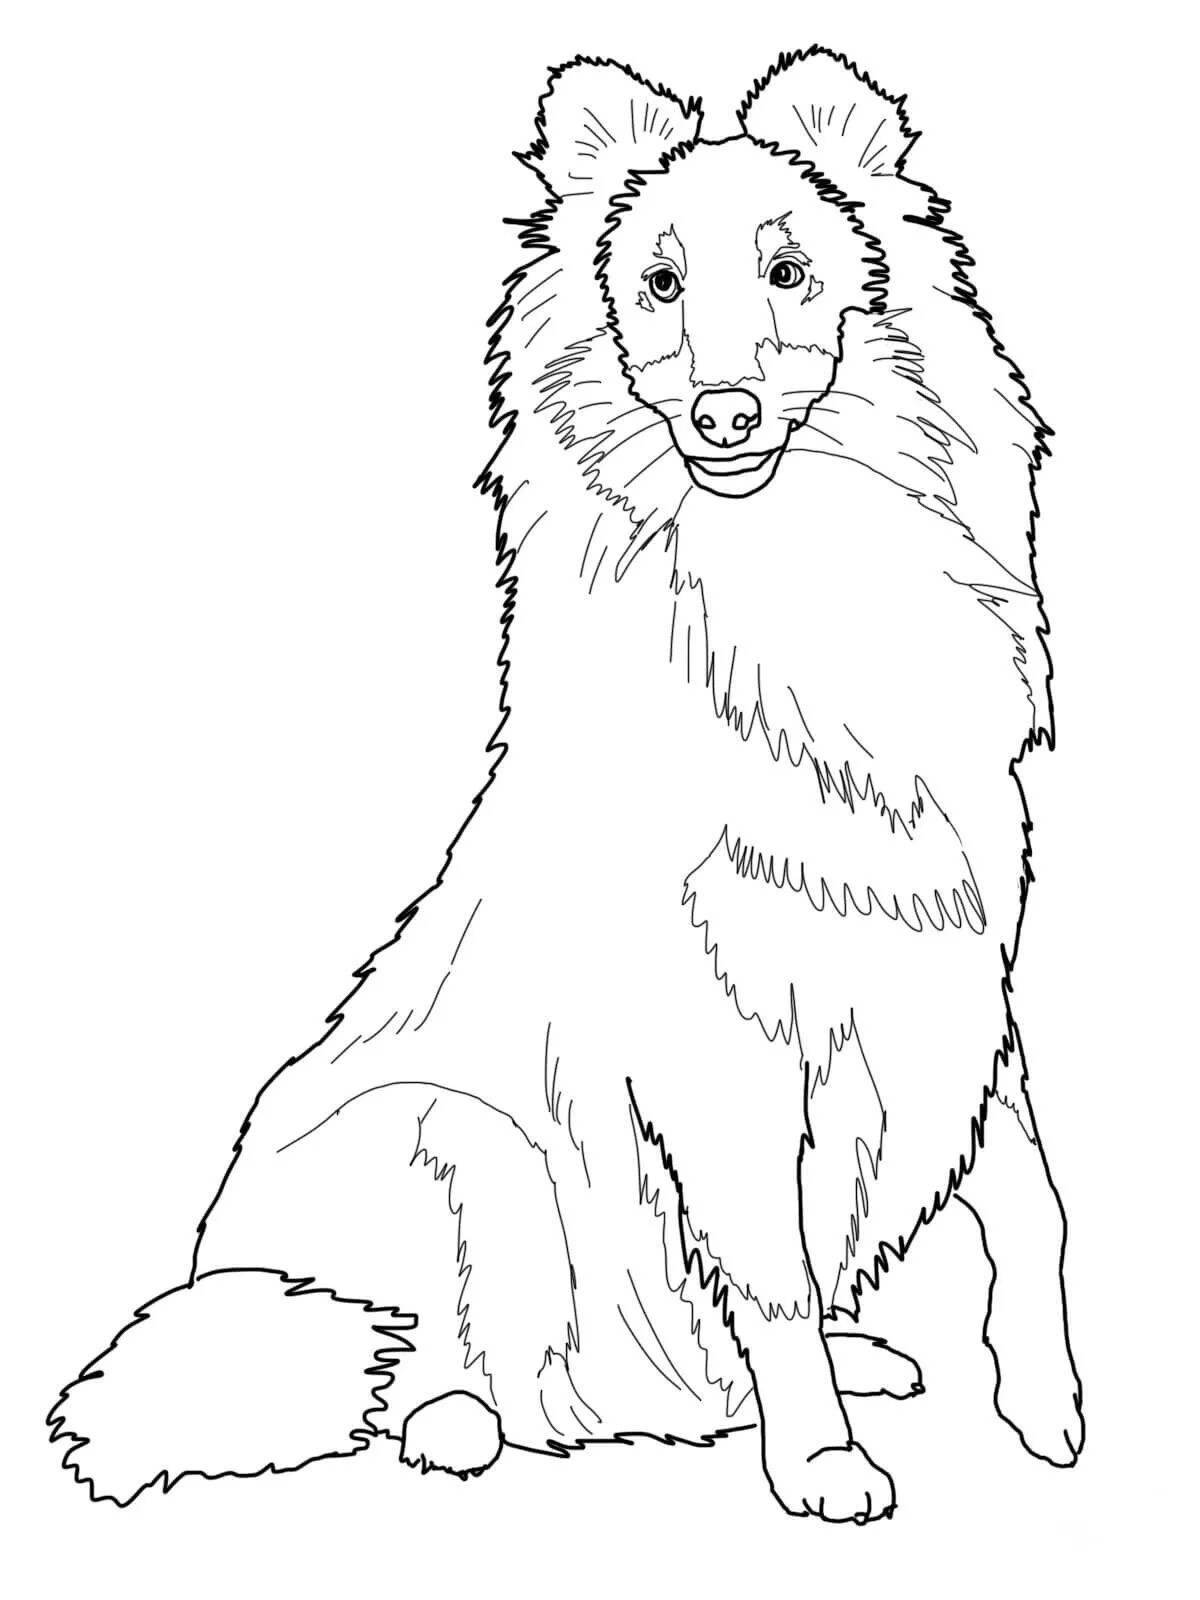 Glowing Lassie Coloring Page